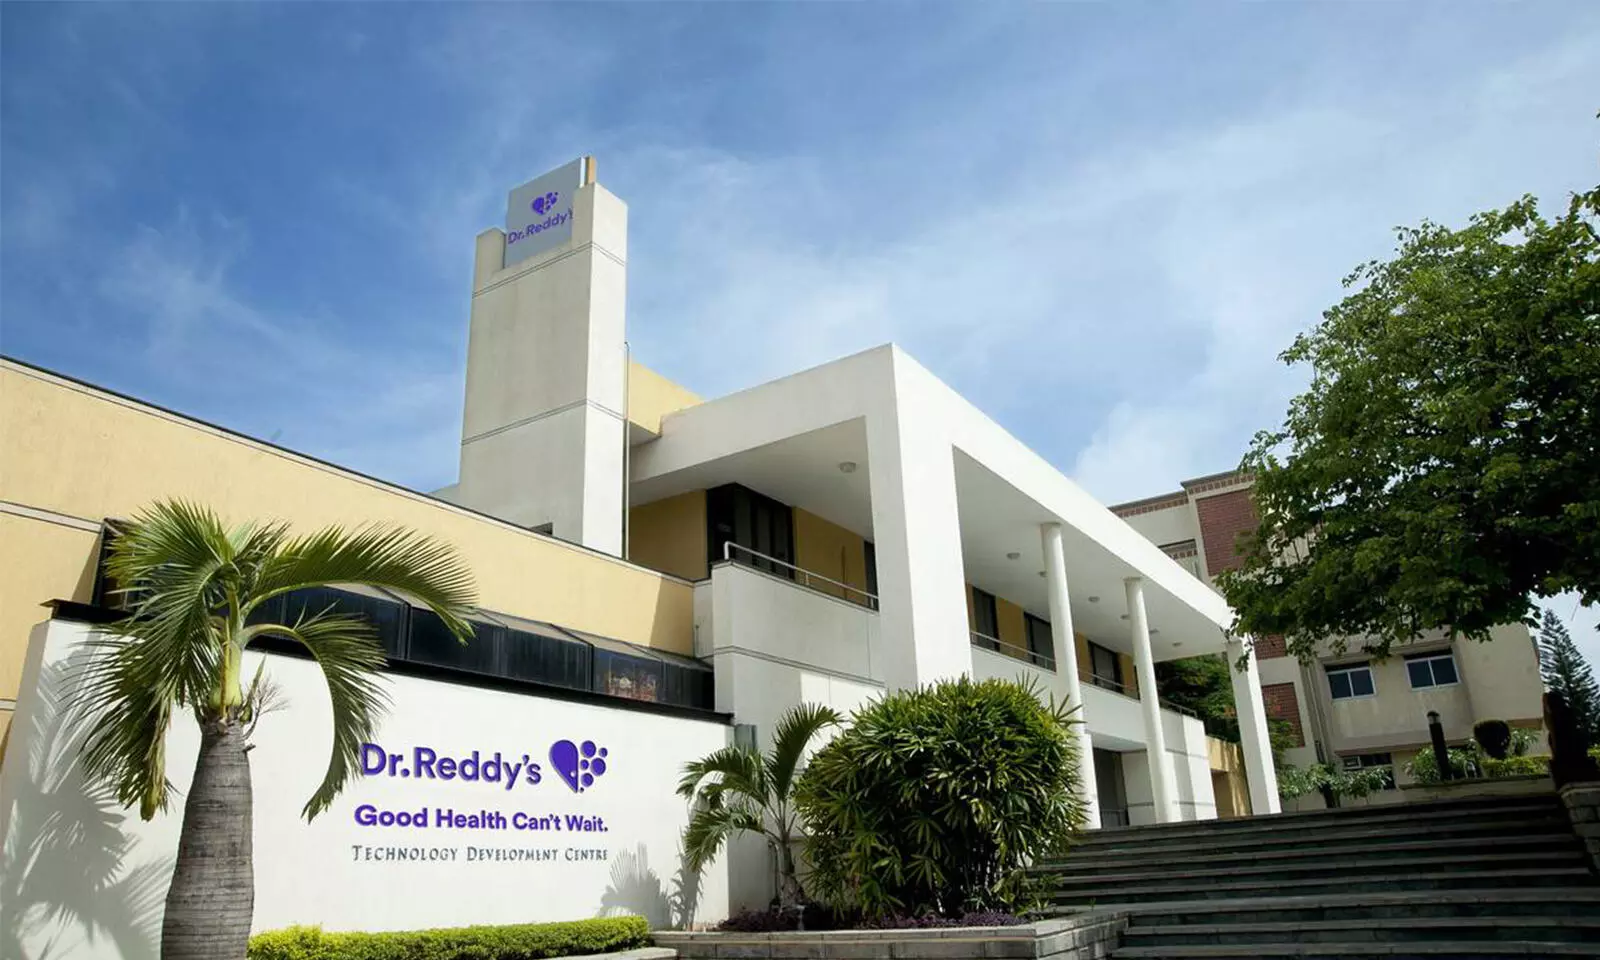 Dr Reddys launches Valsartan in US